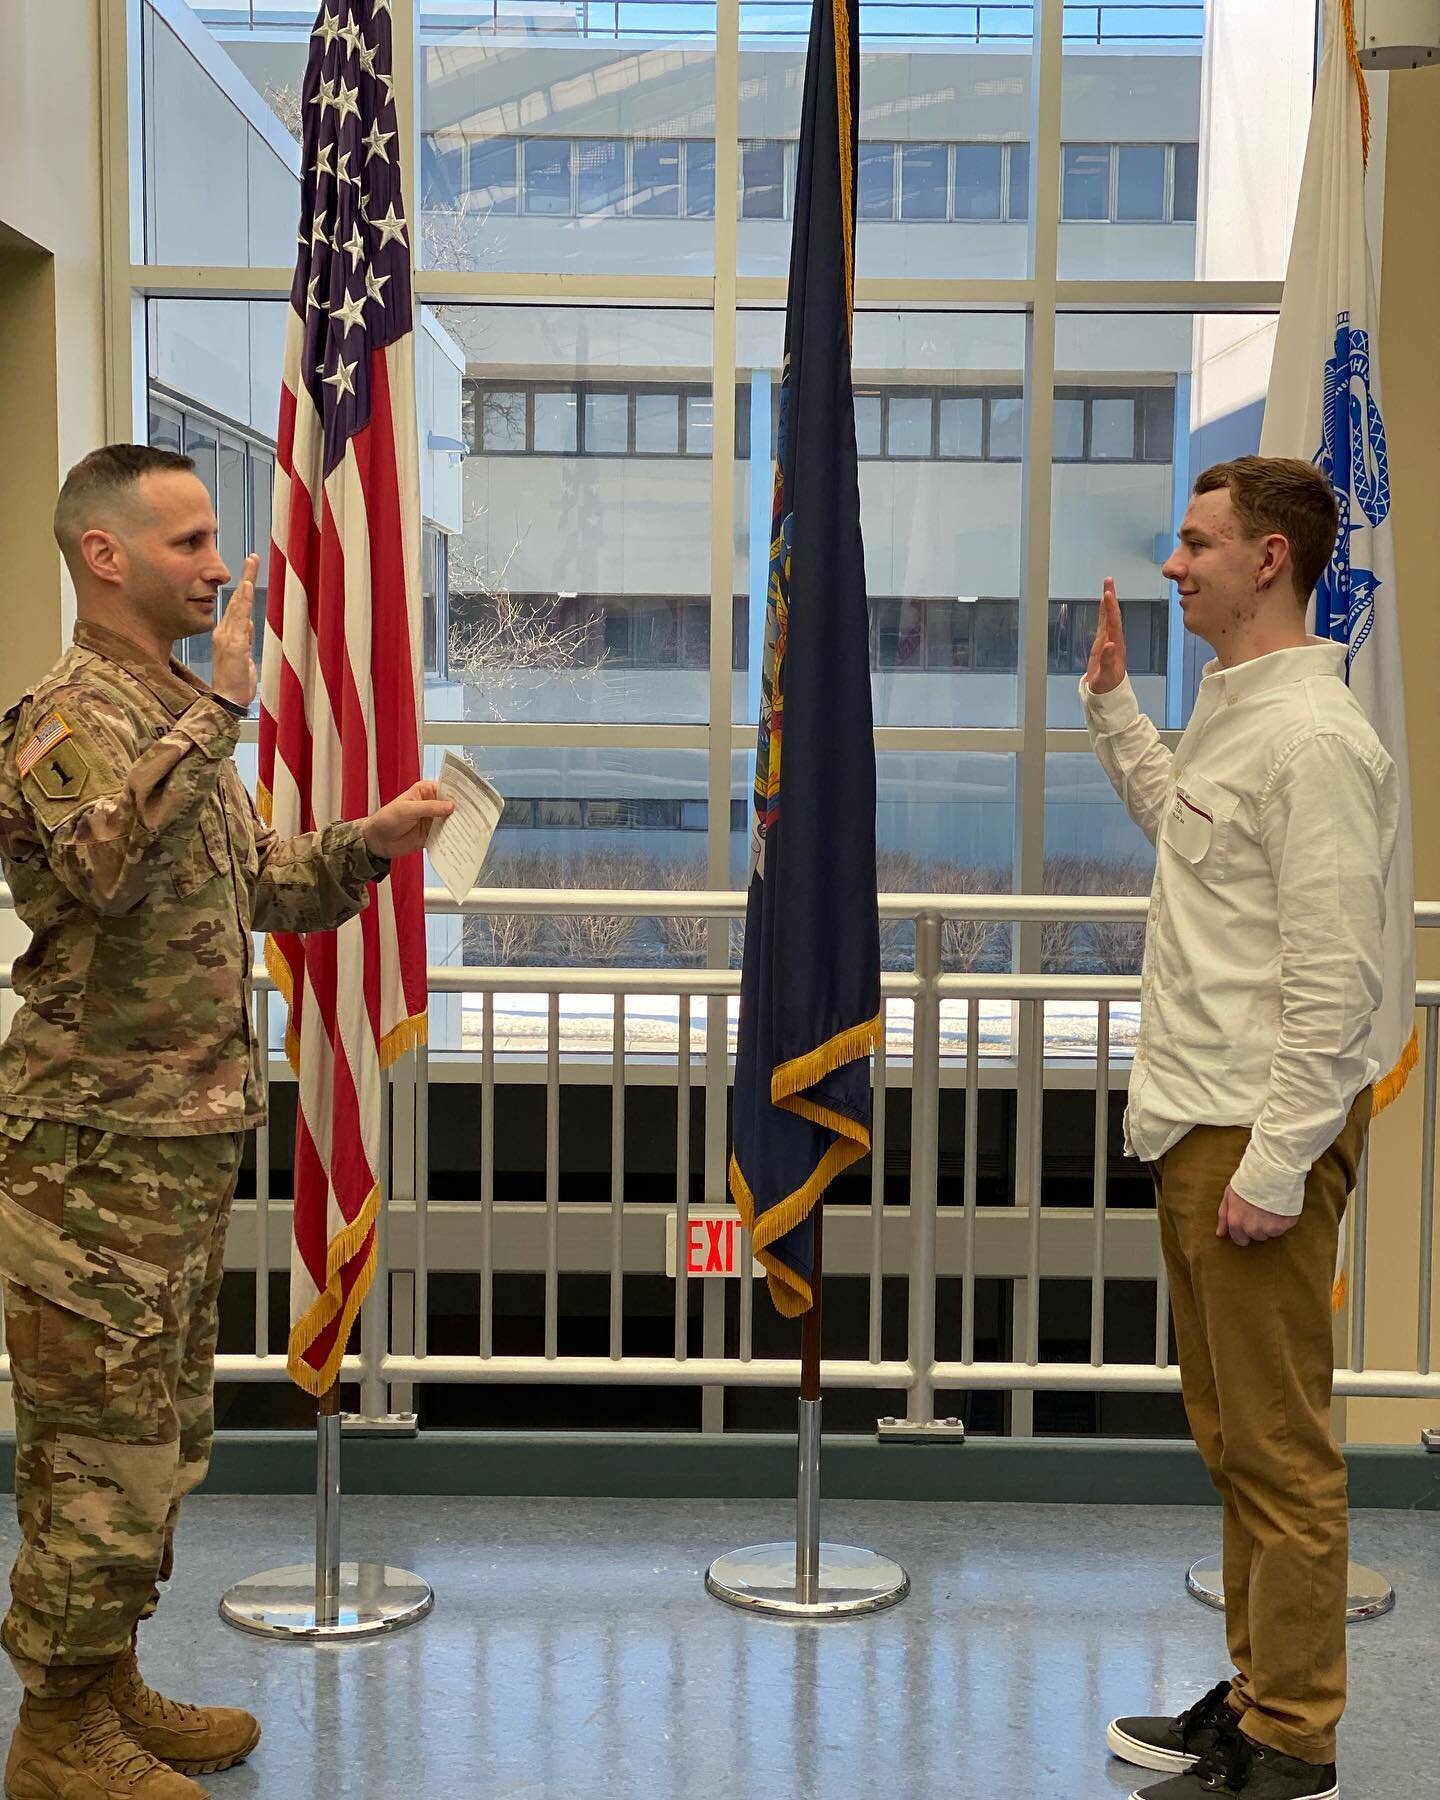 Please welcome the newest member of the New York Army National Guard PVT William Ciejka. Bill has enlisted as an 11B Infantryman and has 24 weeks of OSUT training in his future at the home of the Infantry in Fort Benning,GA.  Congratulations Bill. Fr